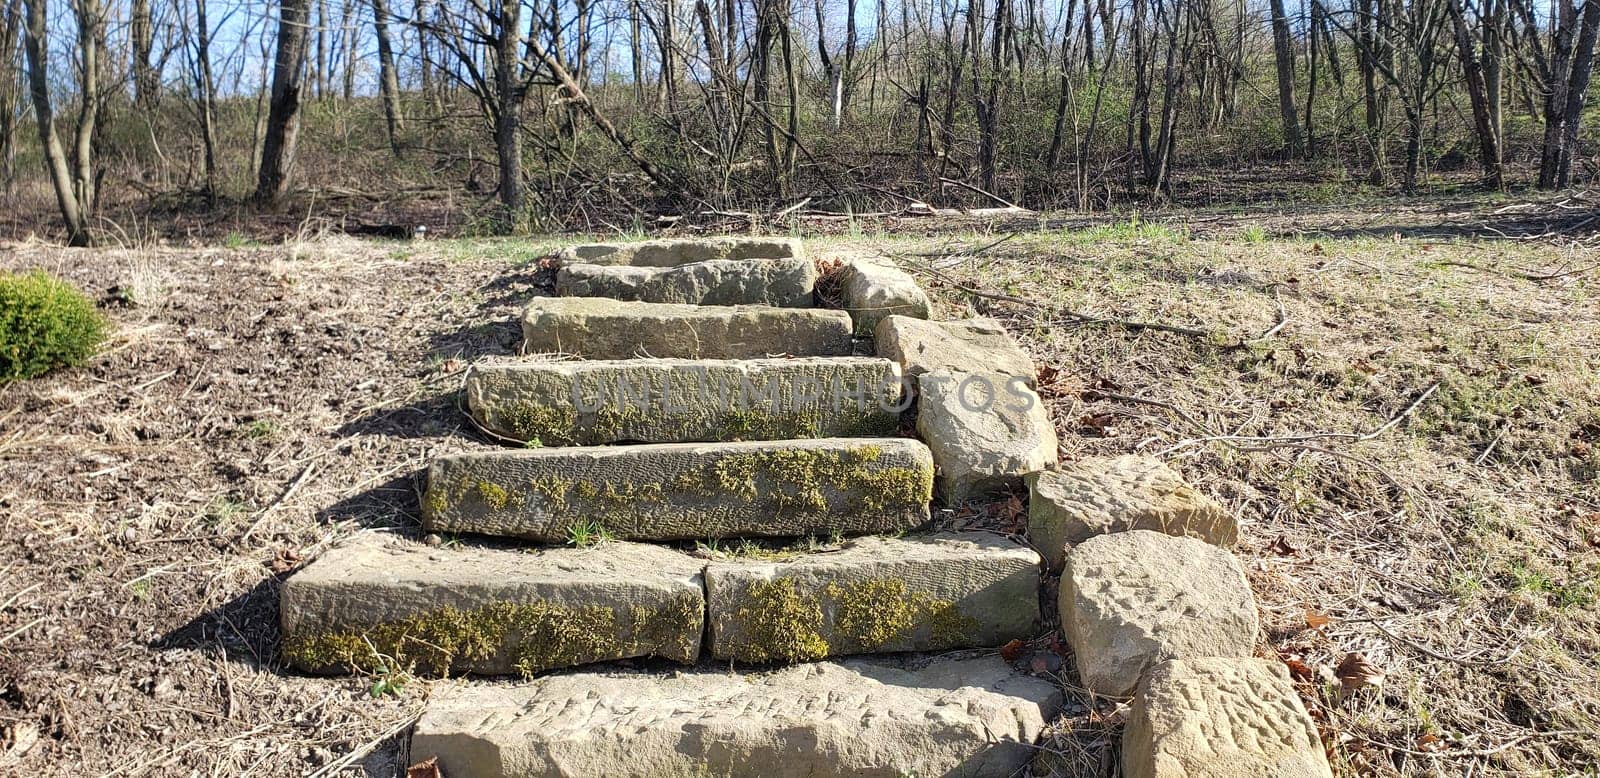 A group of Stone Stairs seen in Early Spring by Txs635